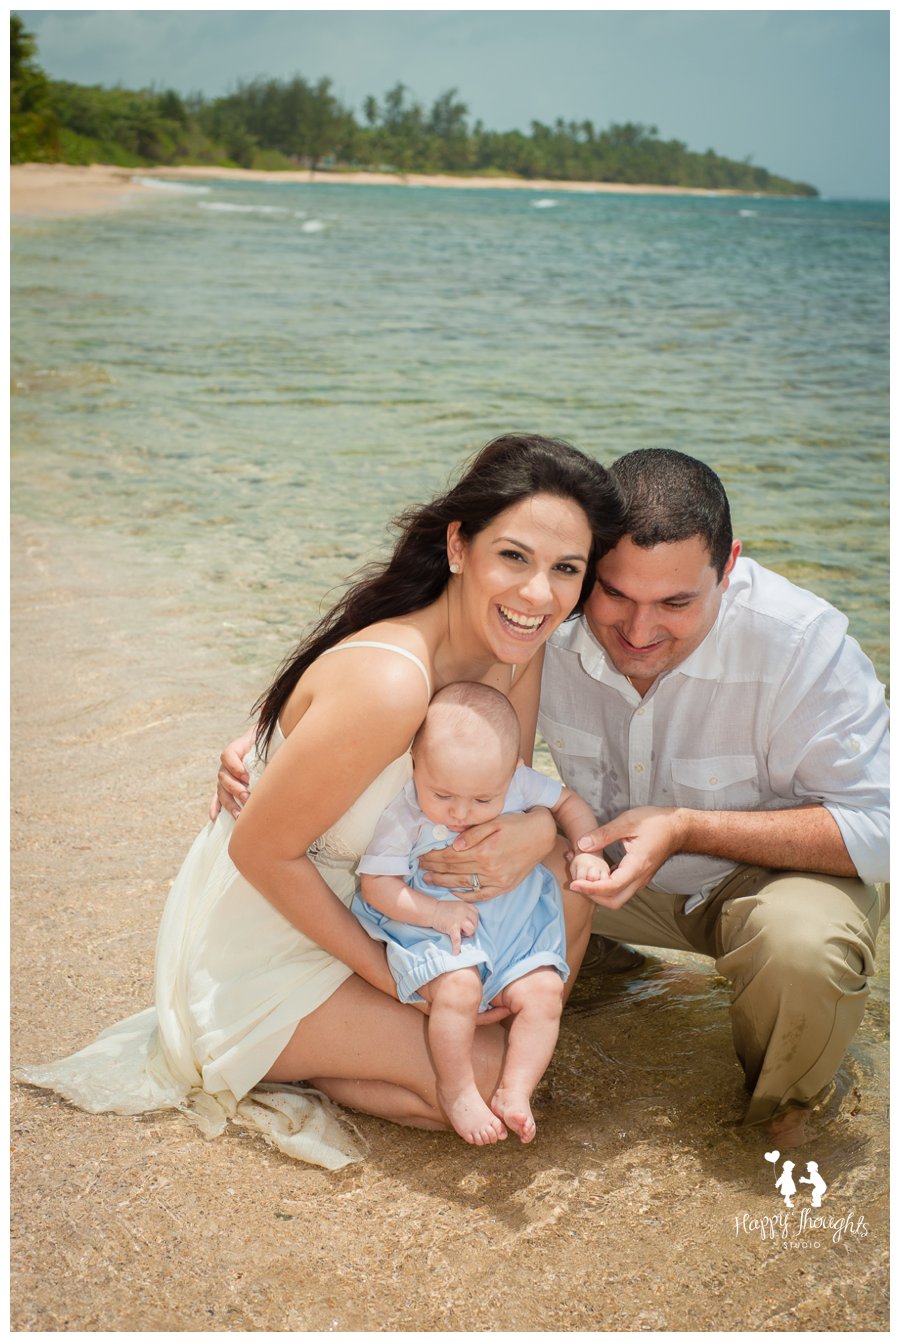 Lifestyle Beach Baby Family Session